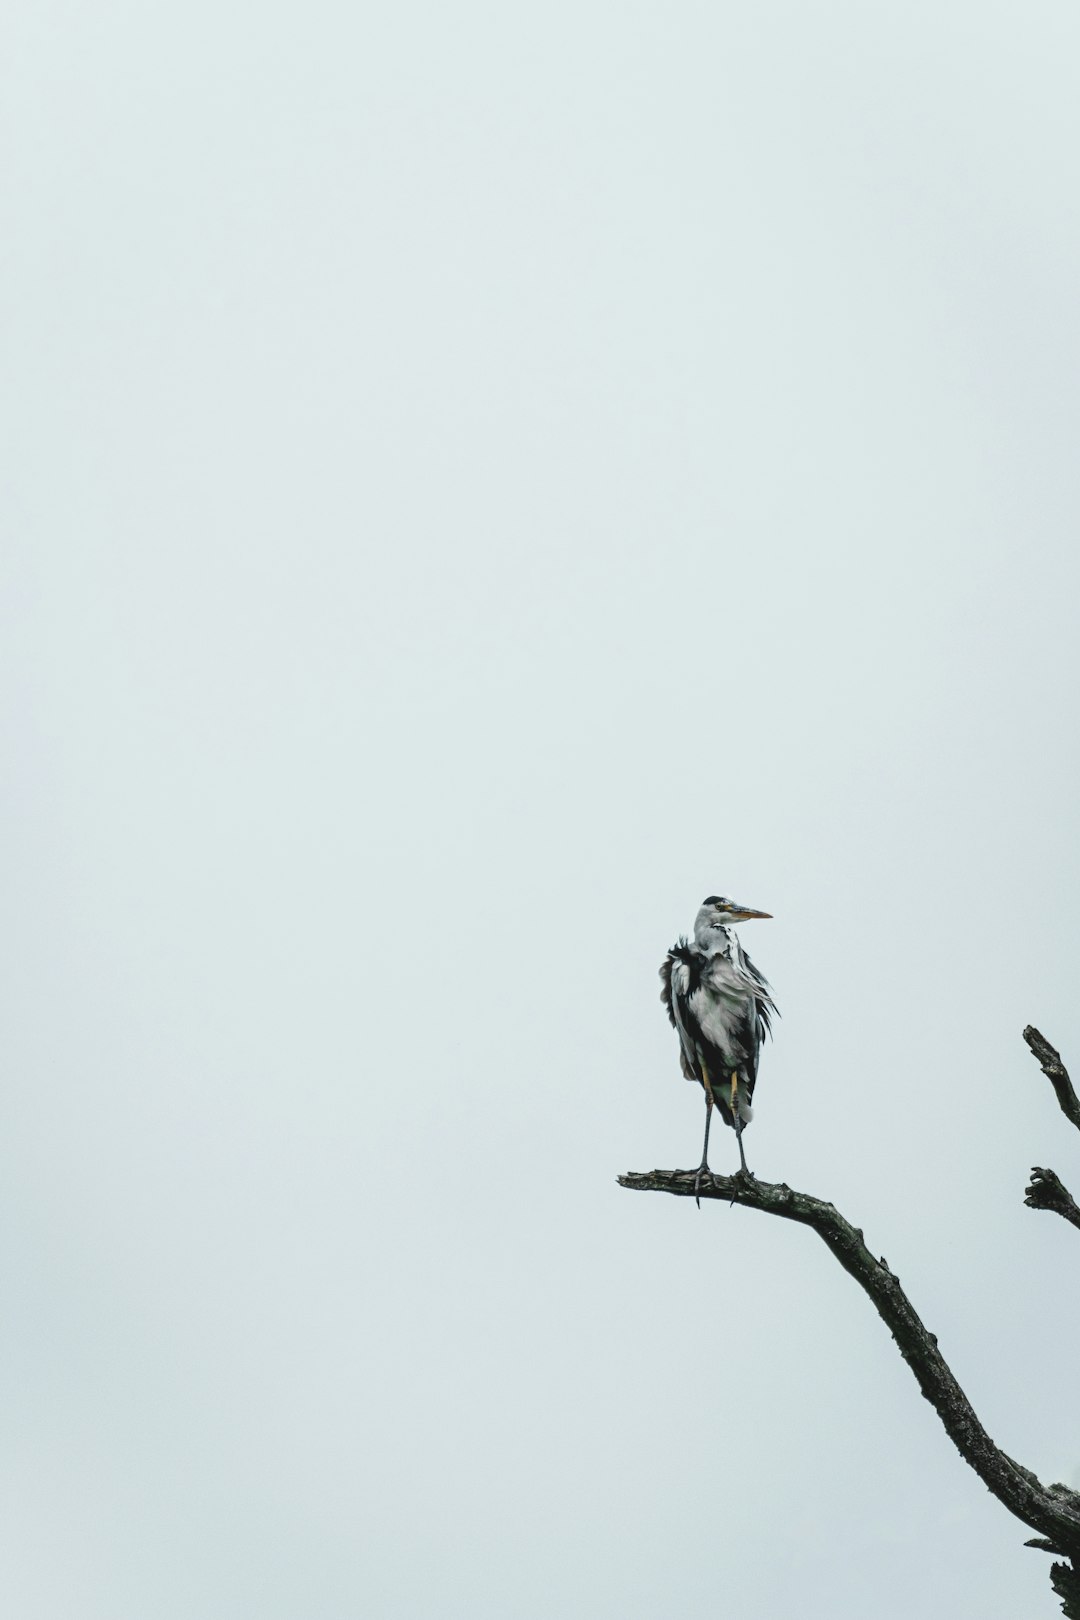 gray and white bird on brown wooden stick